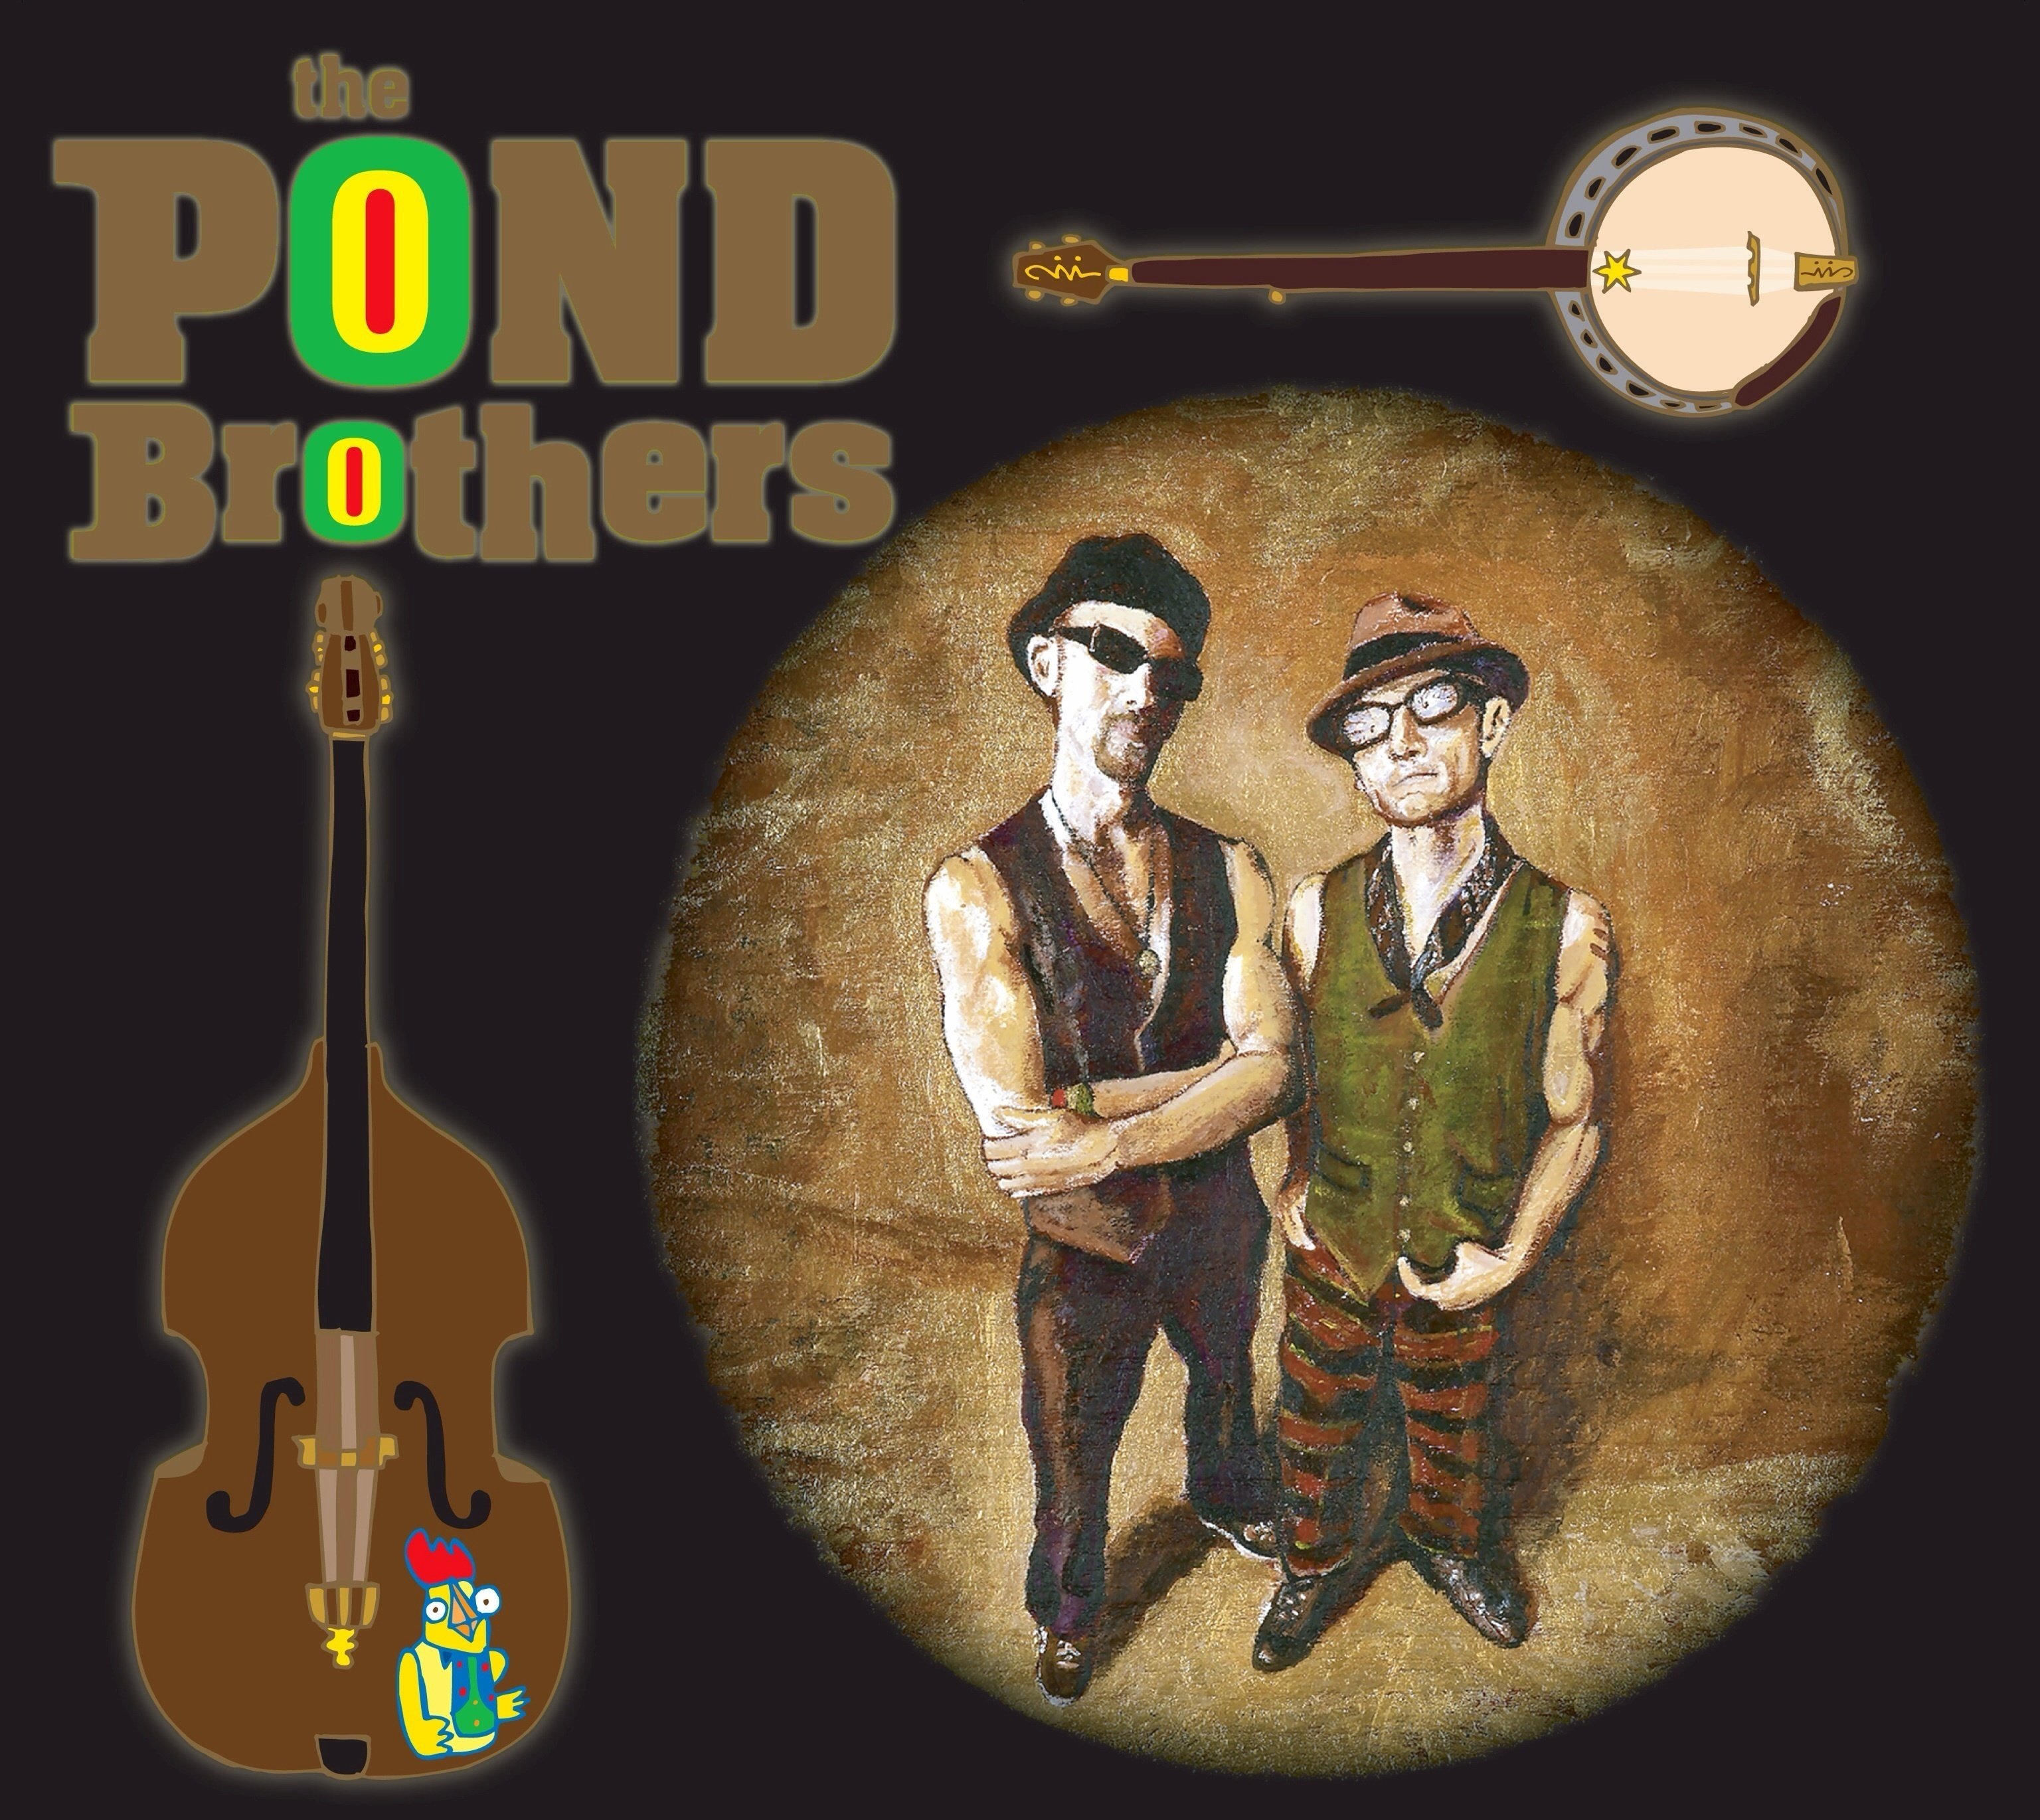 the Pond Brothers | ReverbNation